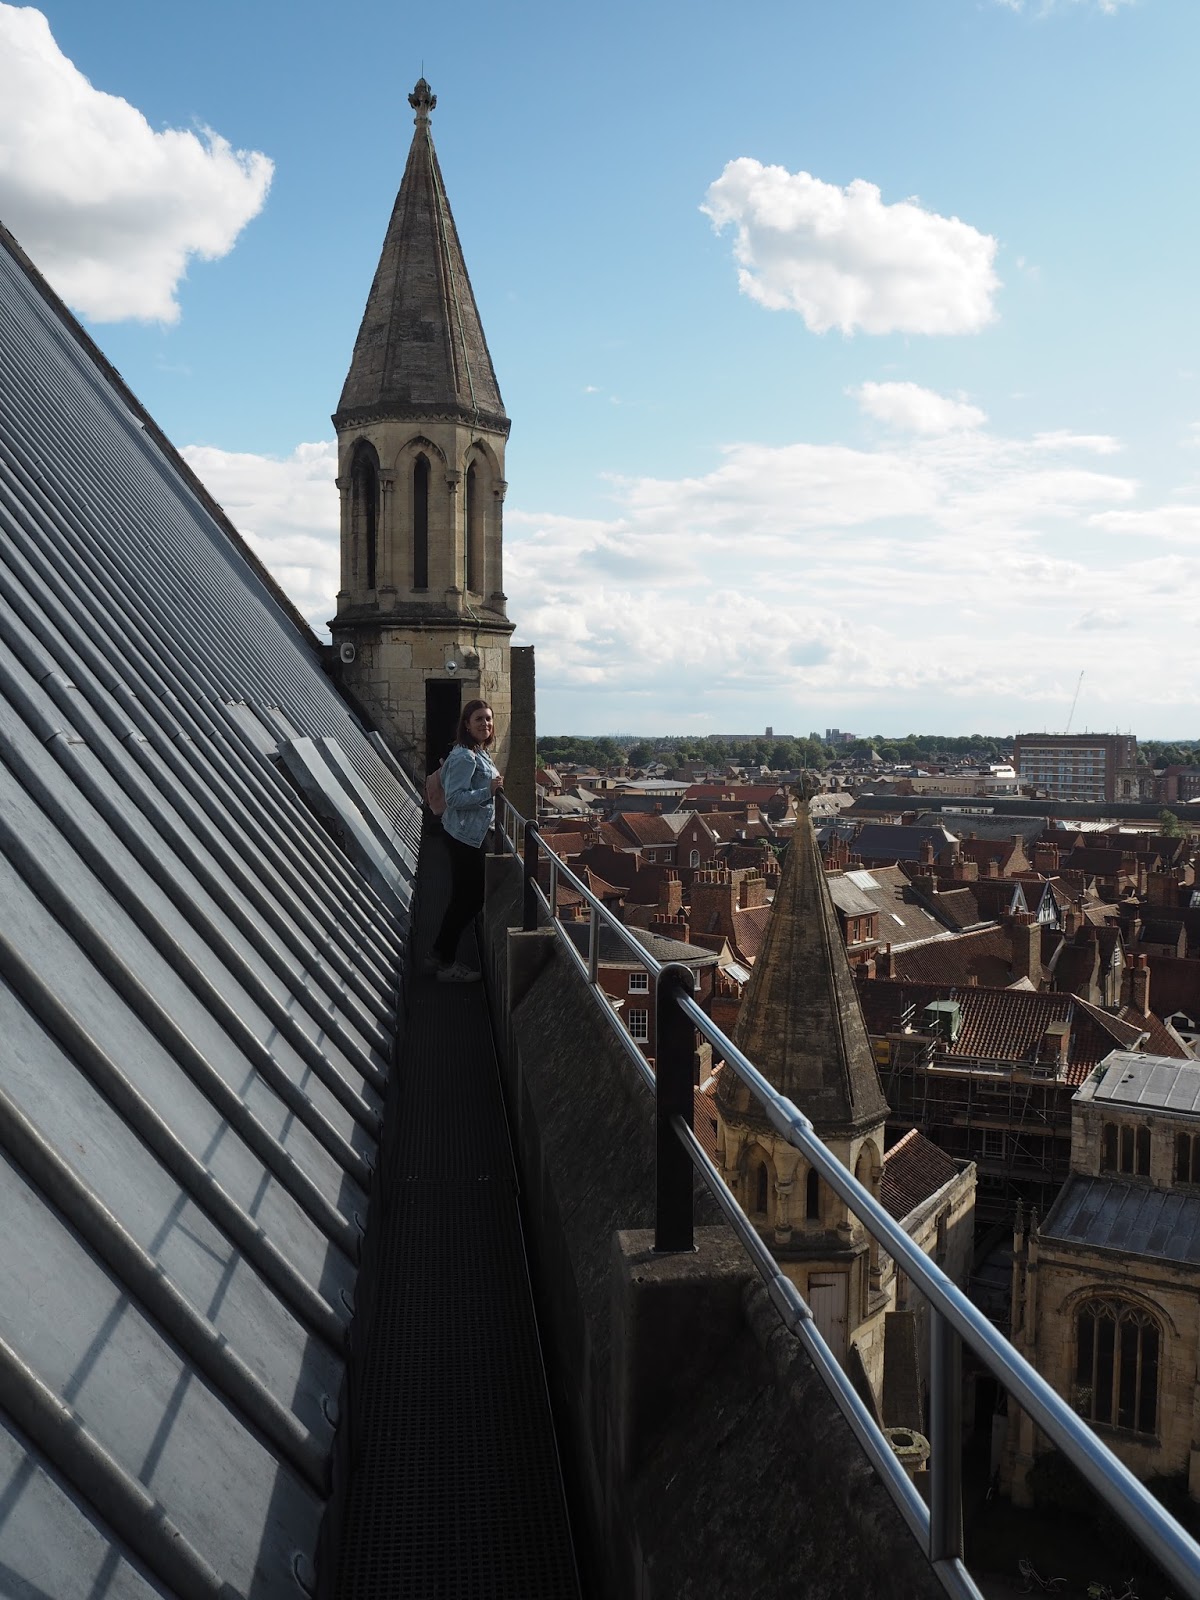 How to spend a day in York